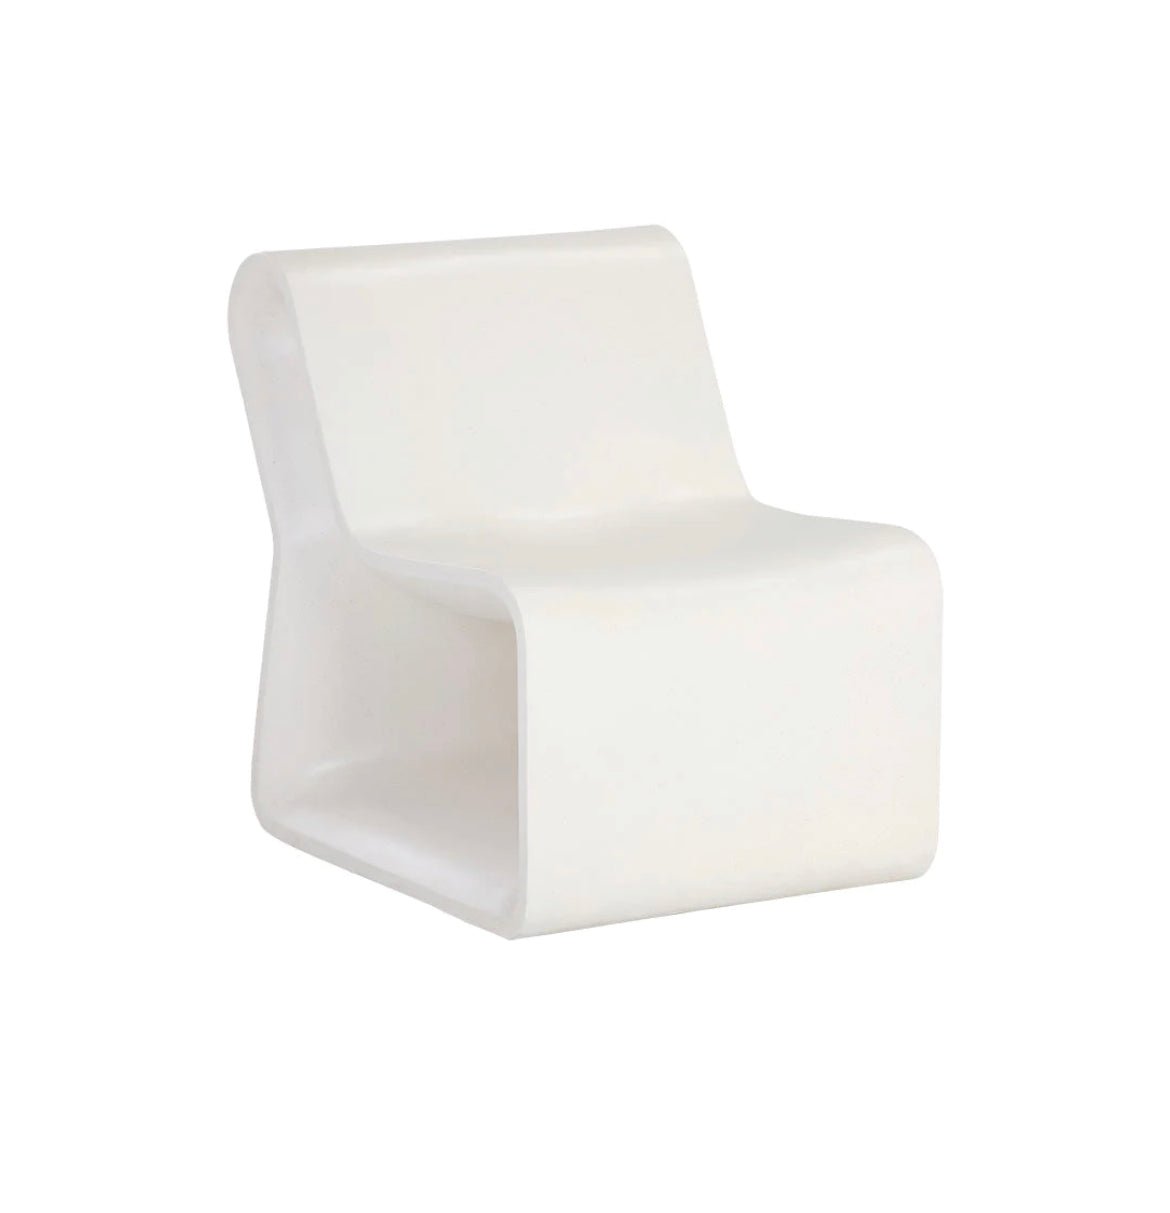 ‘Odyssey’ Lounge Chair (White) - EcoLuxe Furnishings